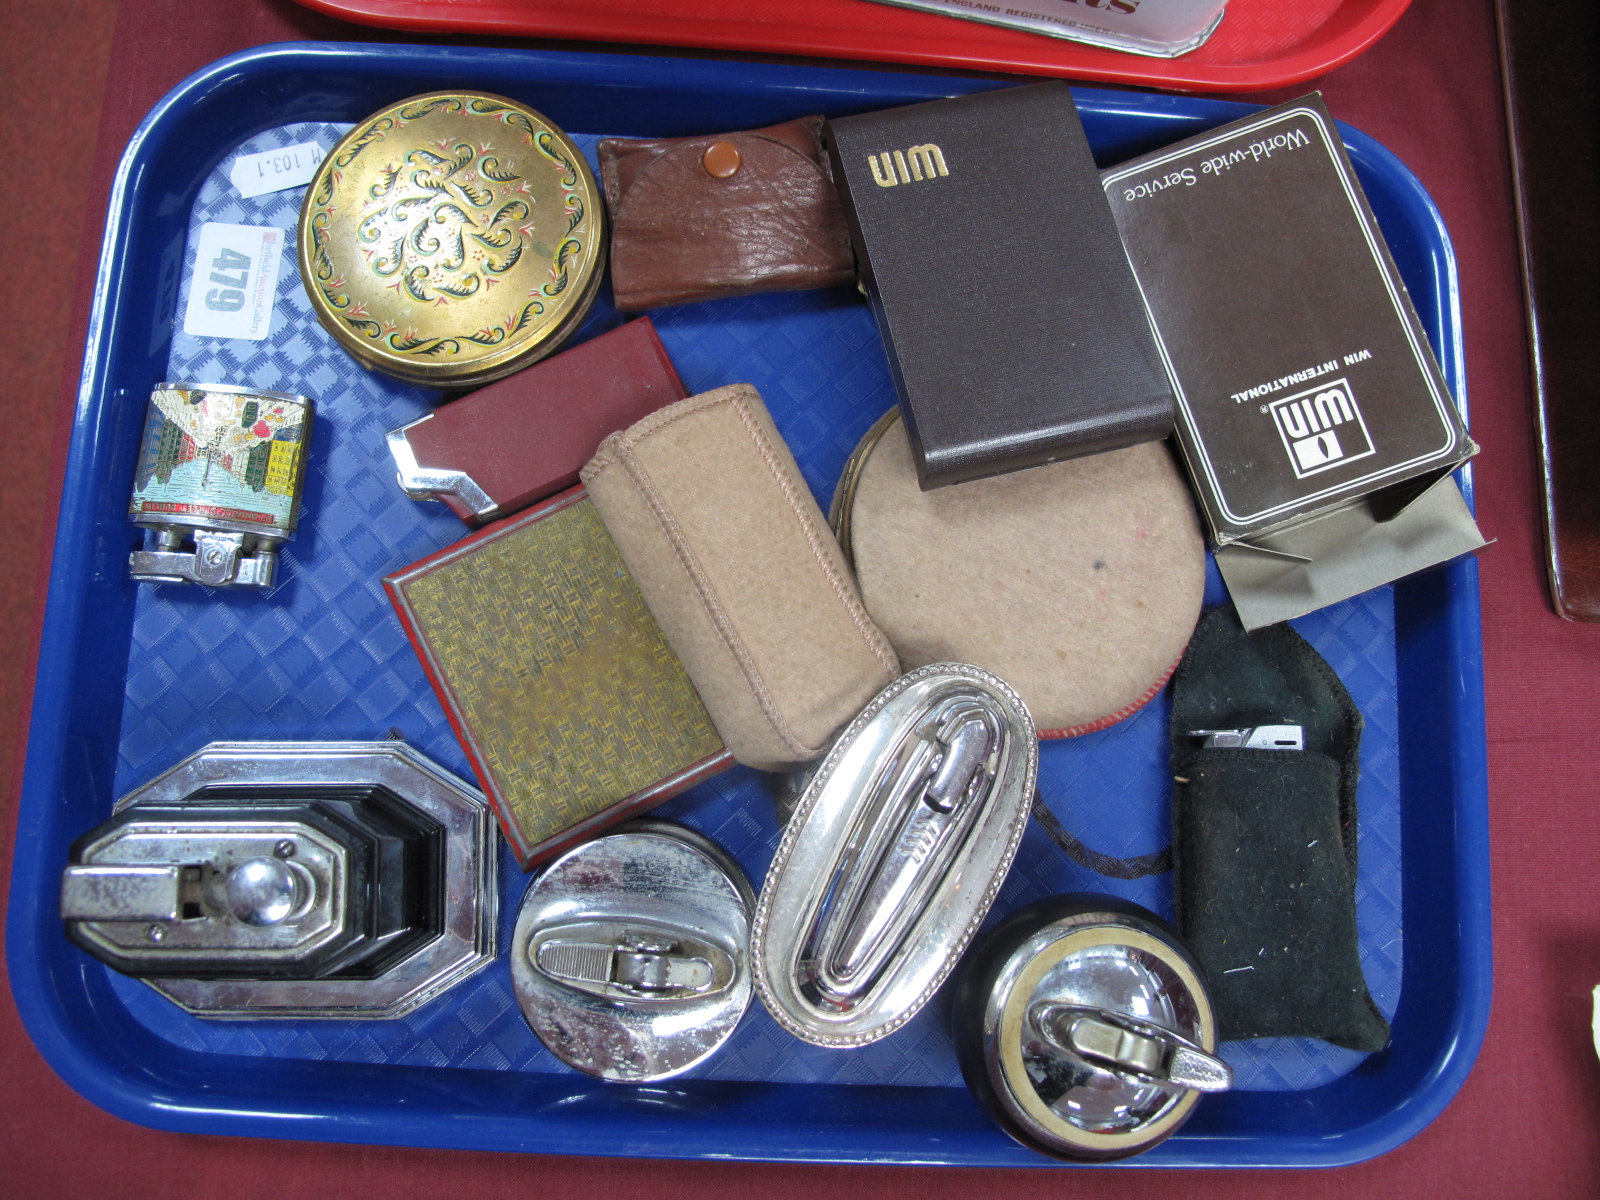 A Ronson Touch Tip Lighter, other Ronson lighters, ladies compact, etc:- One Tray